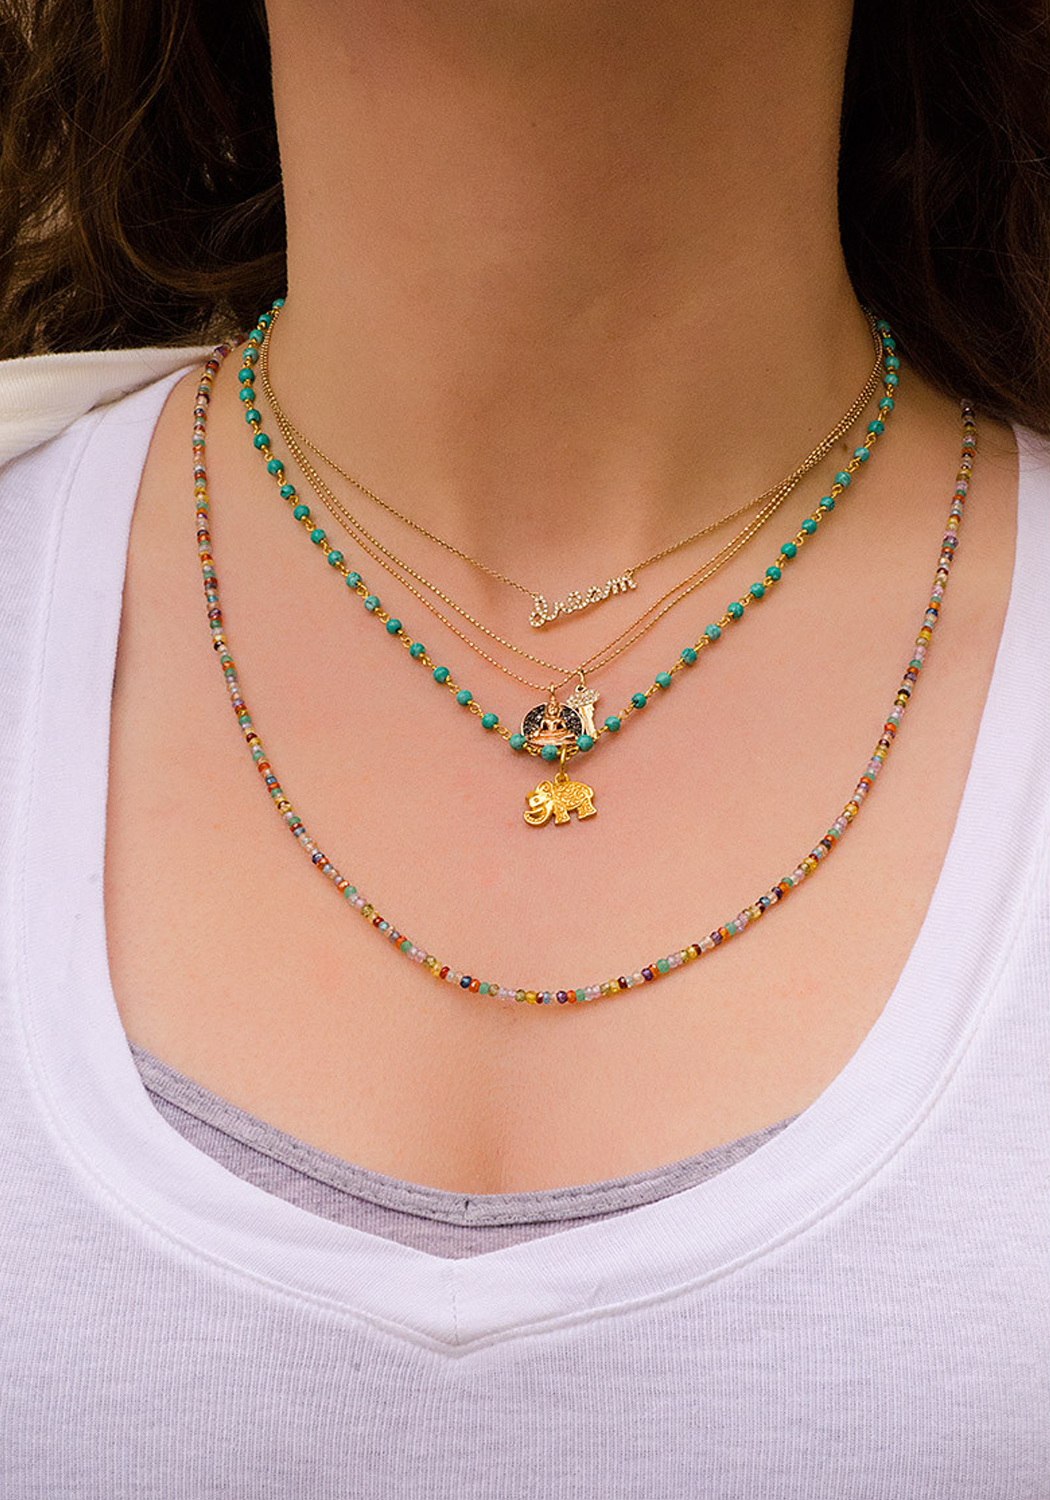 Sydney Evan Layered Necklaces Style Idea (Sold Separately) | OsterJewelers.com